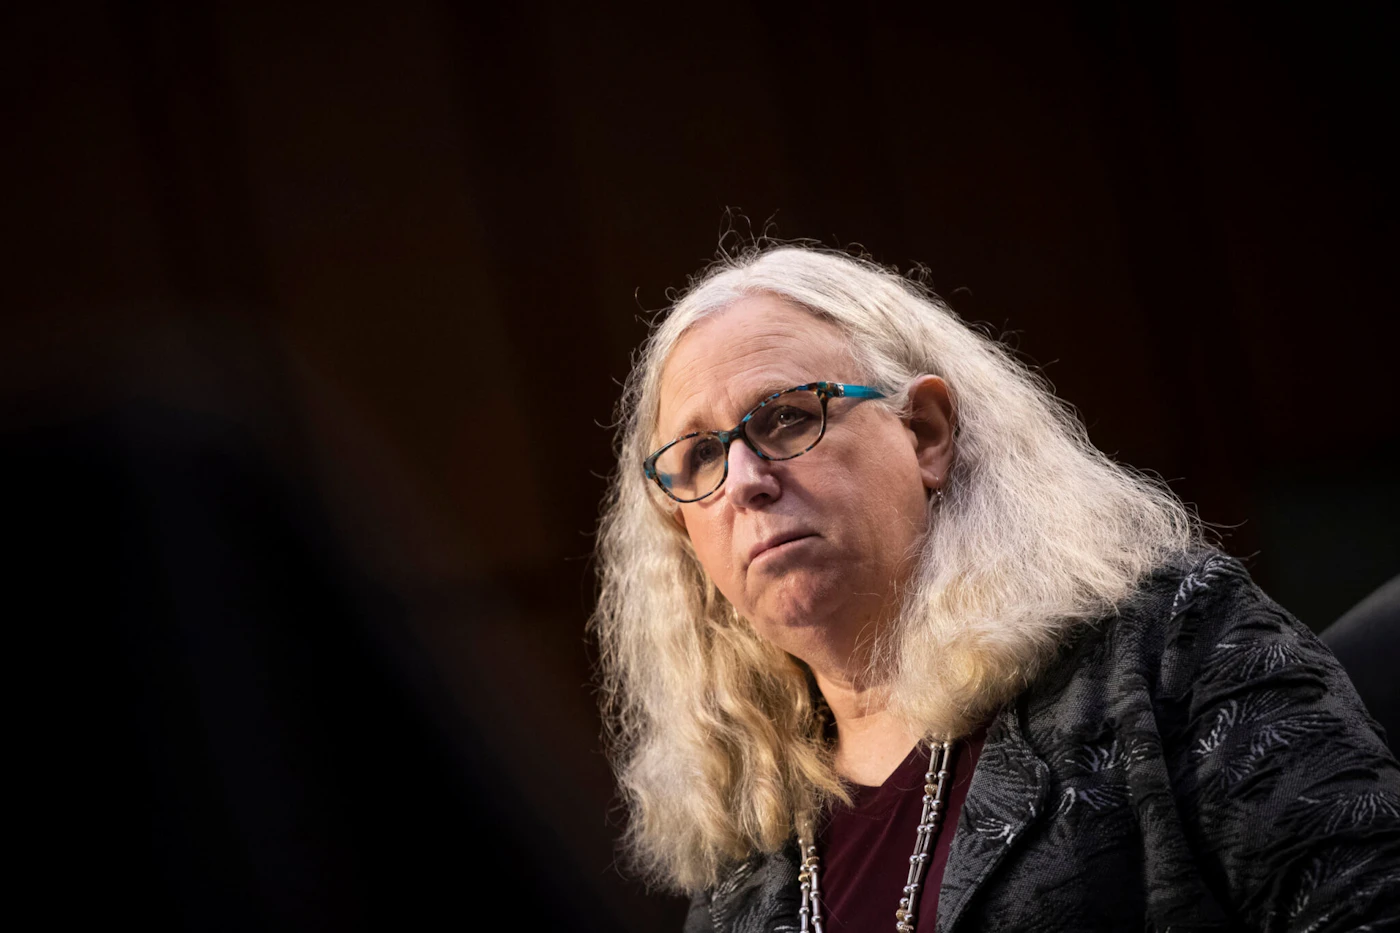 Rachel Levine, nominated to be an assistant secretary at the Department of Health and Human Services, testifies before the Senate Health, Education, Labor, and Pensions committee on Capitol Hill in Washington on Thursday, Feb. 25, 2021. (Caroline Brehman/Pool via AP)